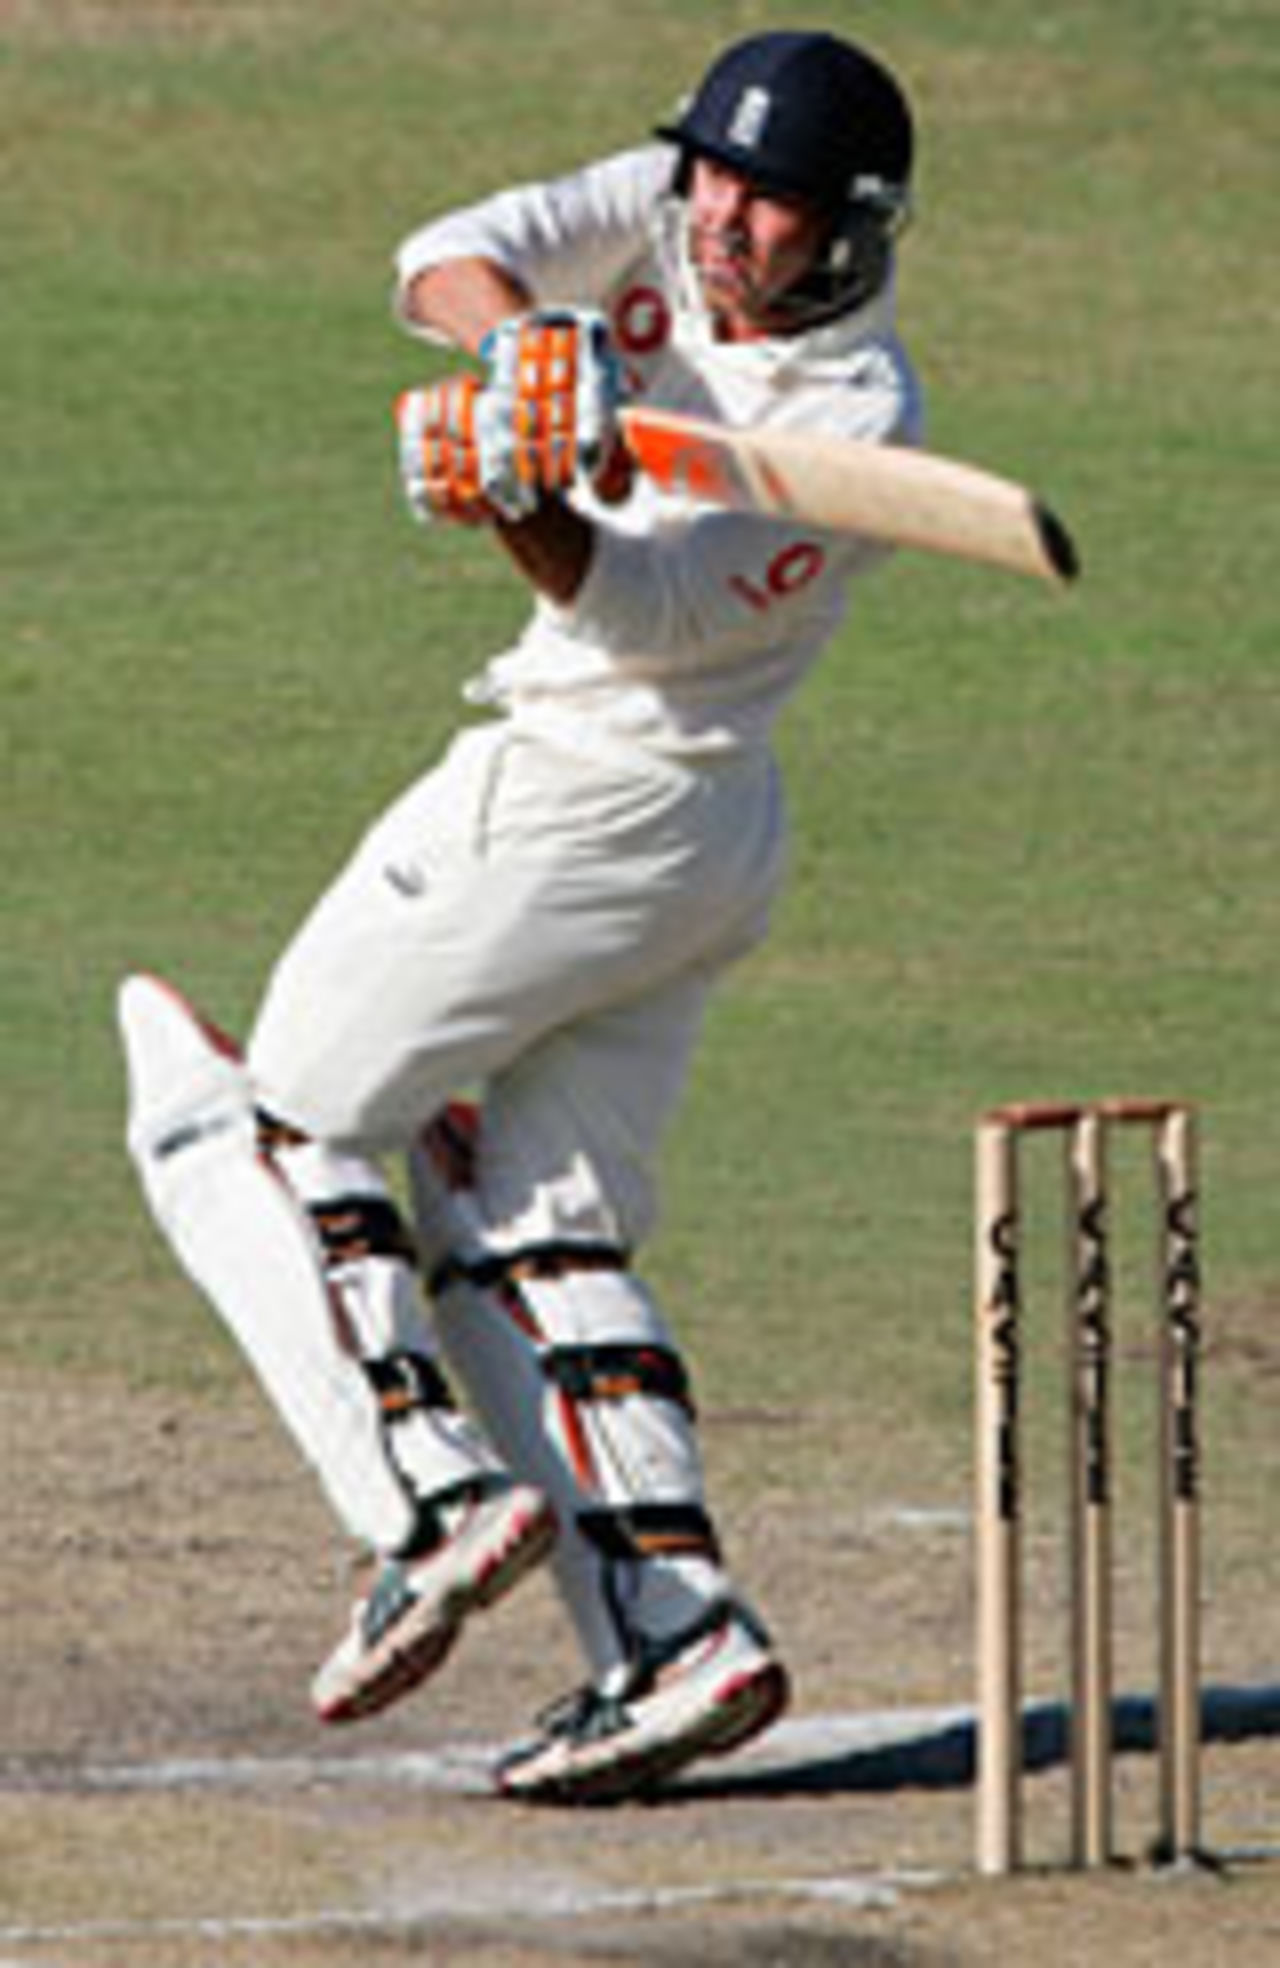 Geraint Jones hooks on his way to a second-innings fifty, South Africa v England, 2nd Test, Durban, 4th day, December 29 2004